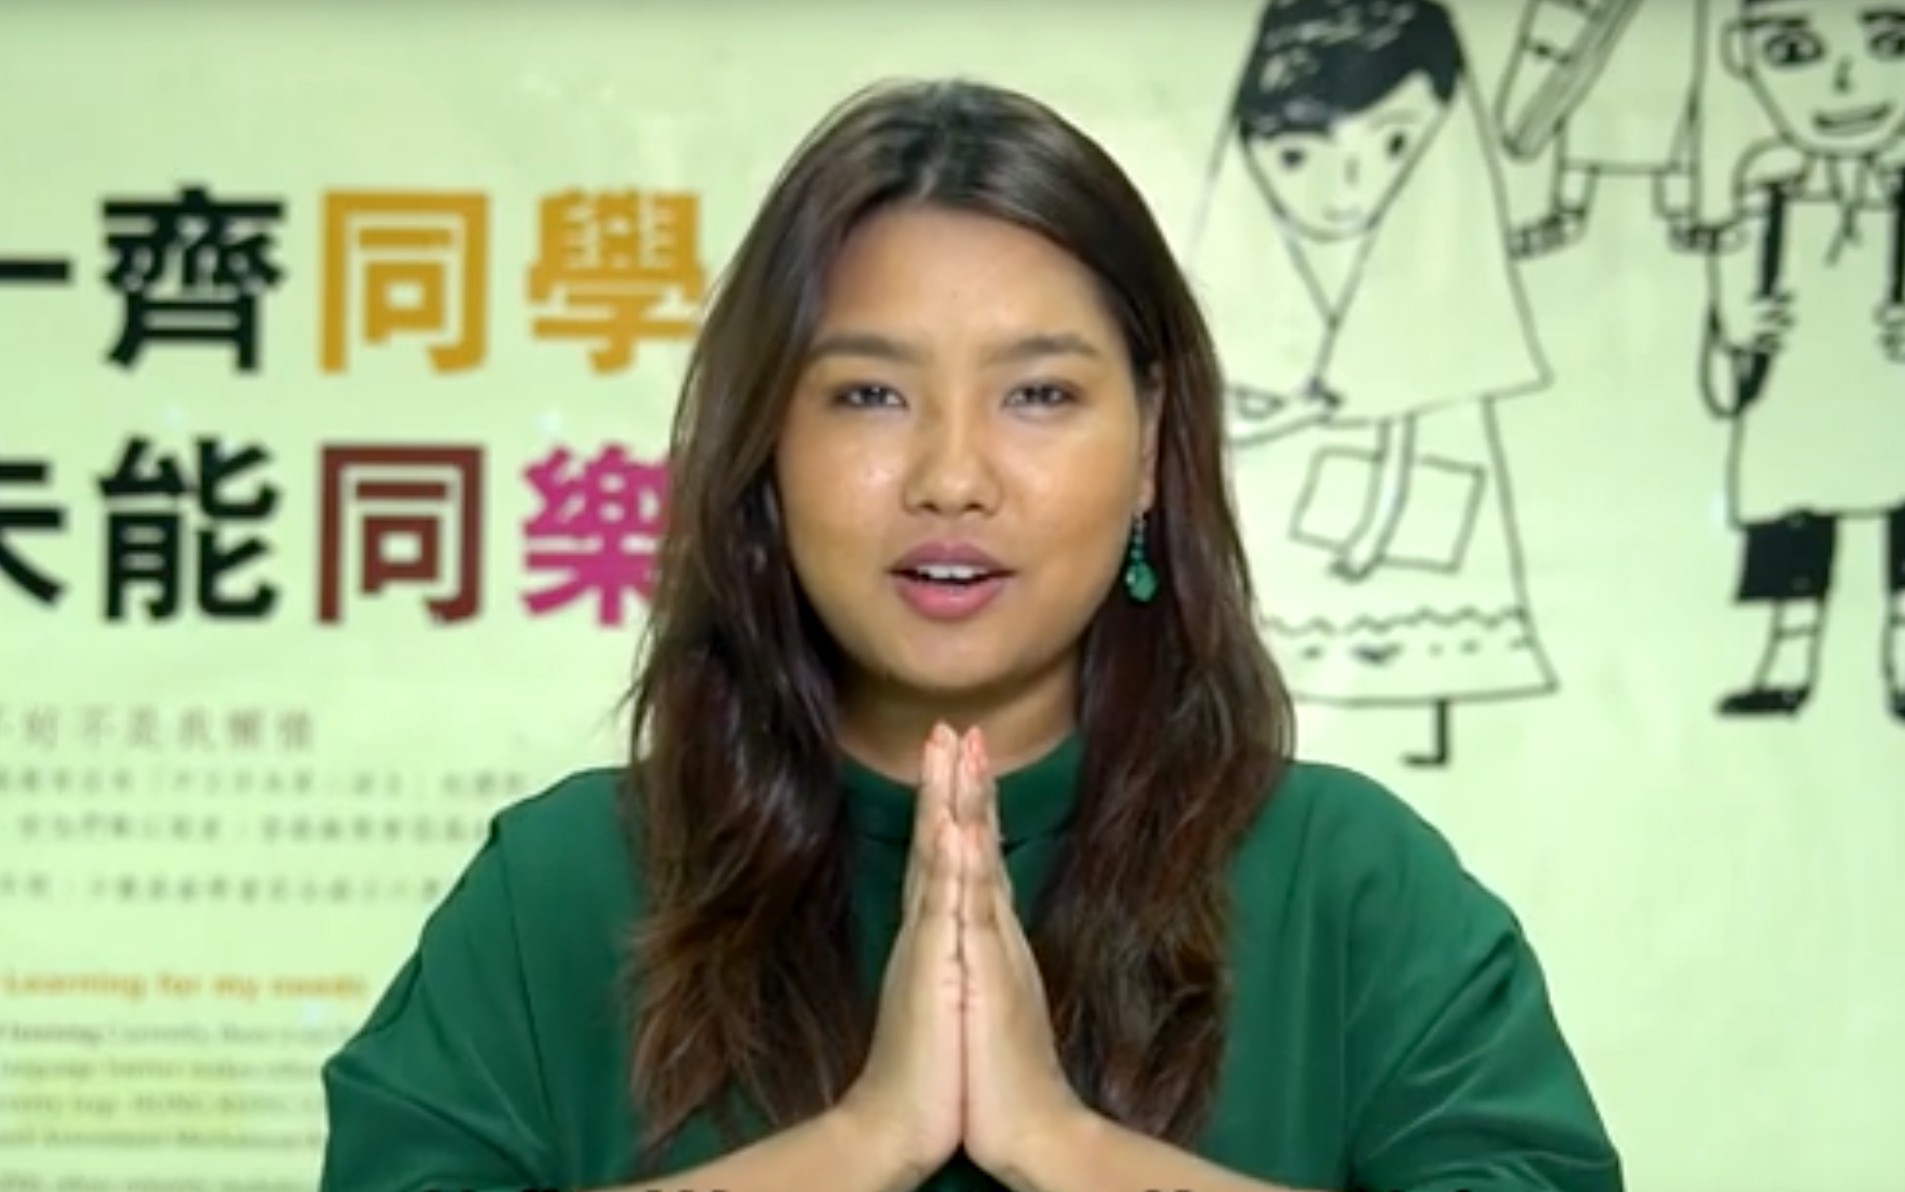 An explanatory video with a host speaking Nepali. Photo: Hong Kong Unison